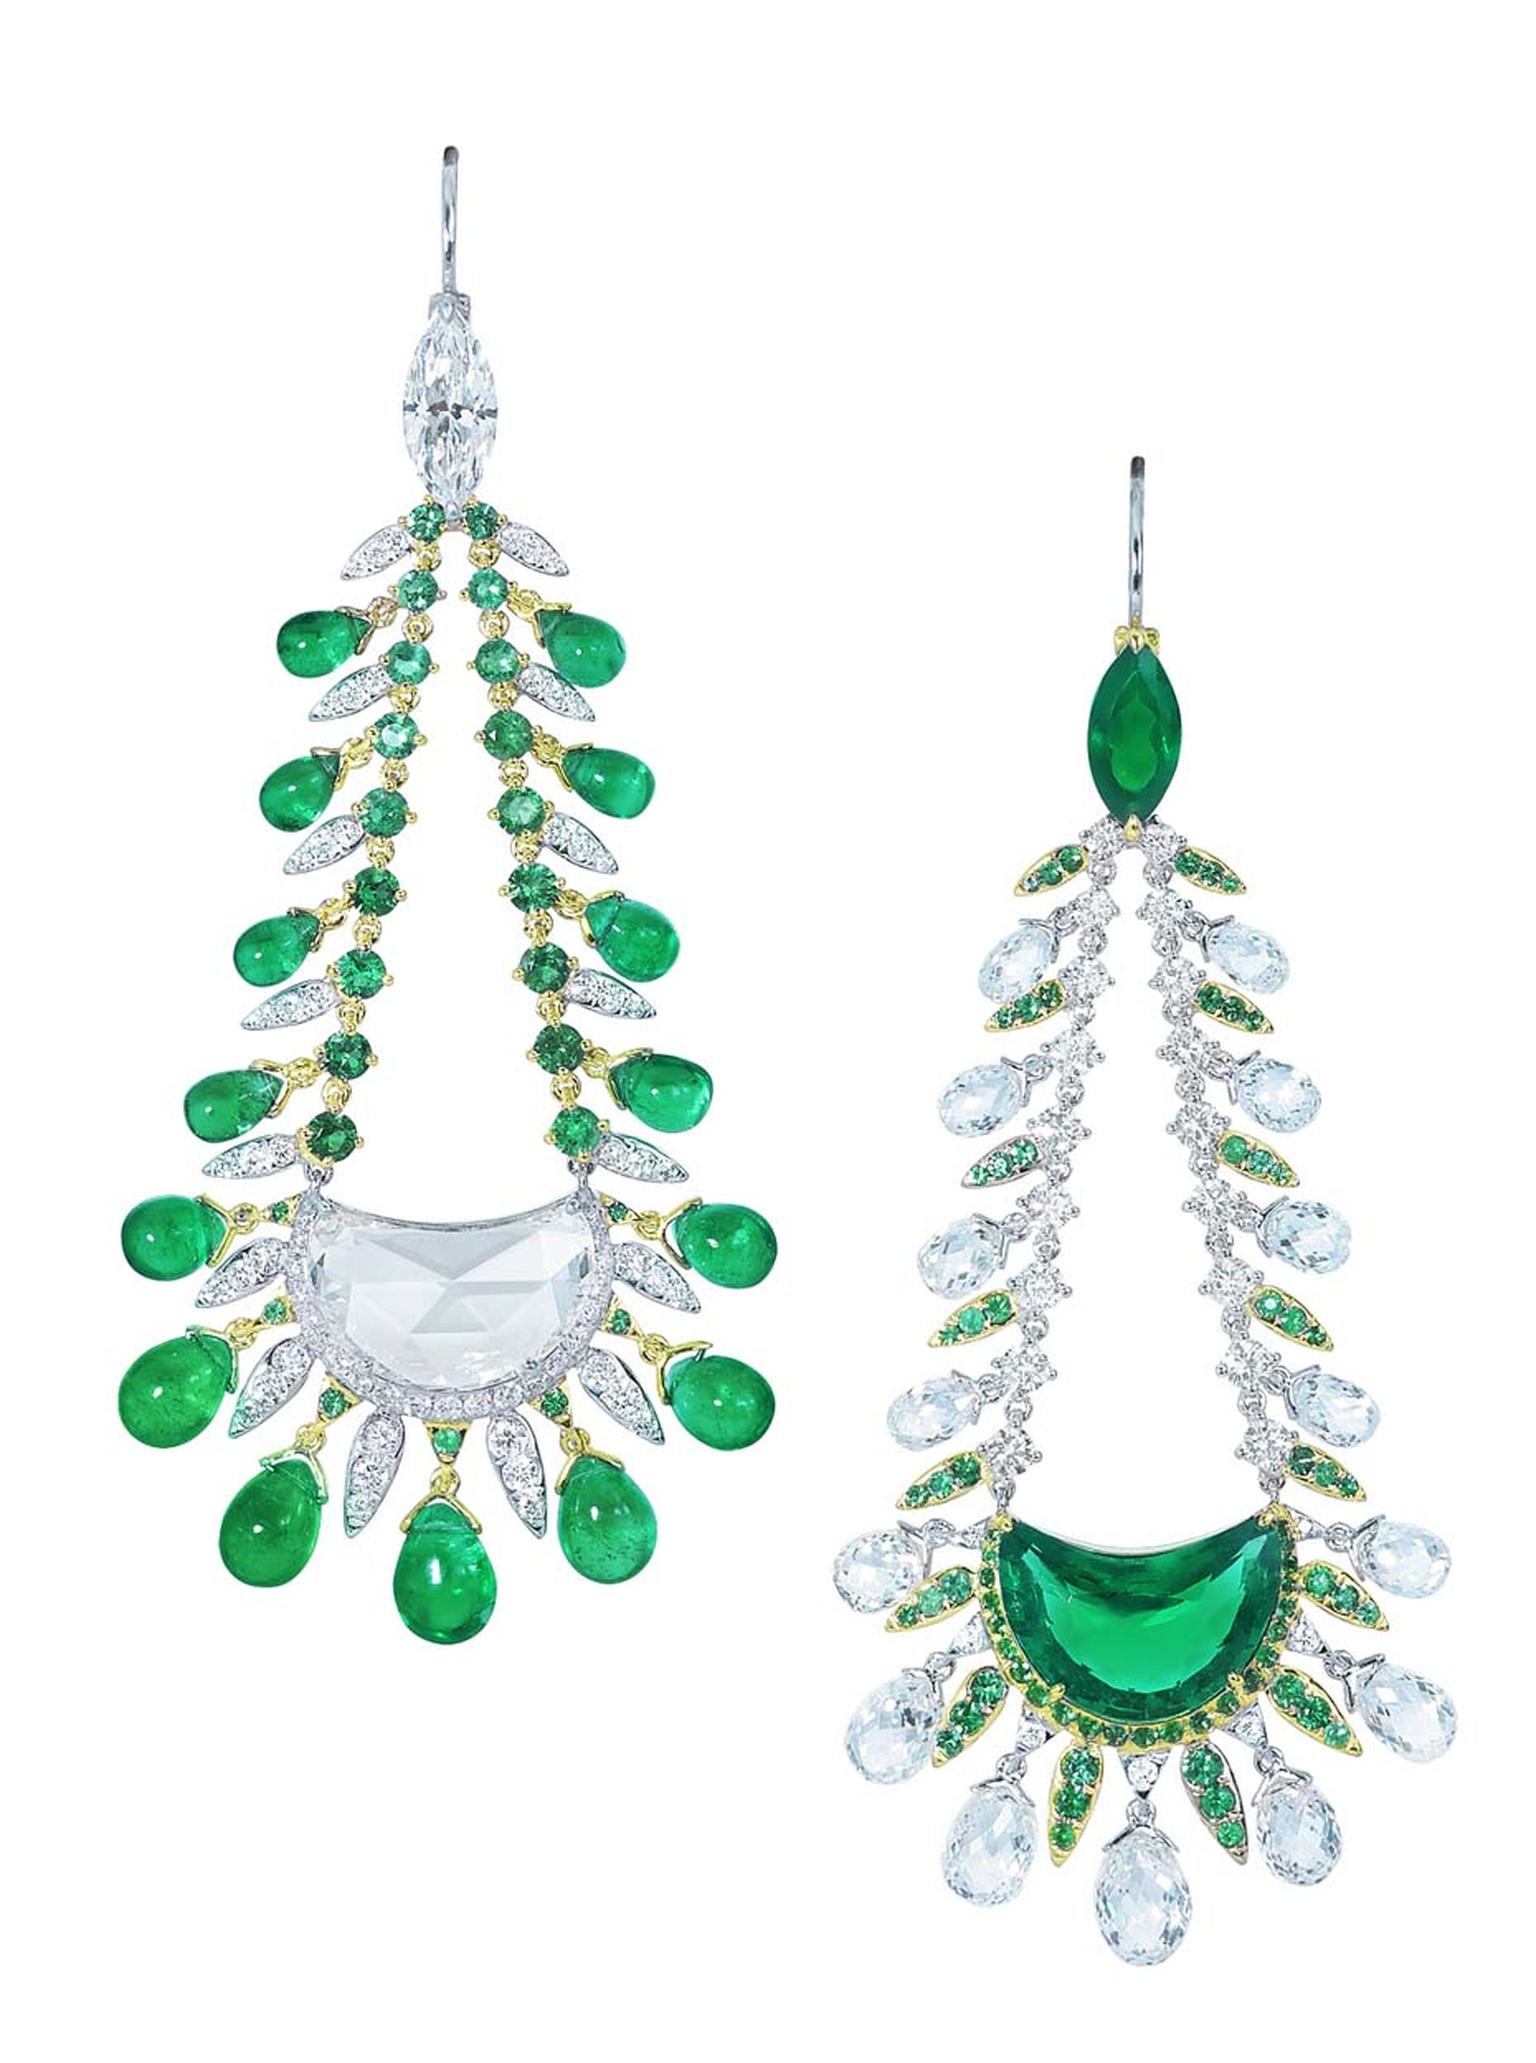 Also on show at DJWE will be this pair of Moussaieff high jewellery earrings set with a half moon Colombian emerald and a half moon diamond.